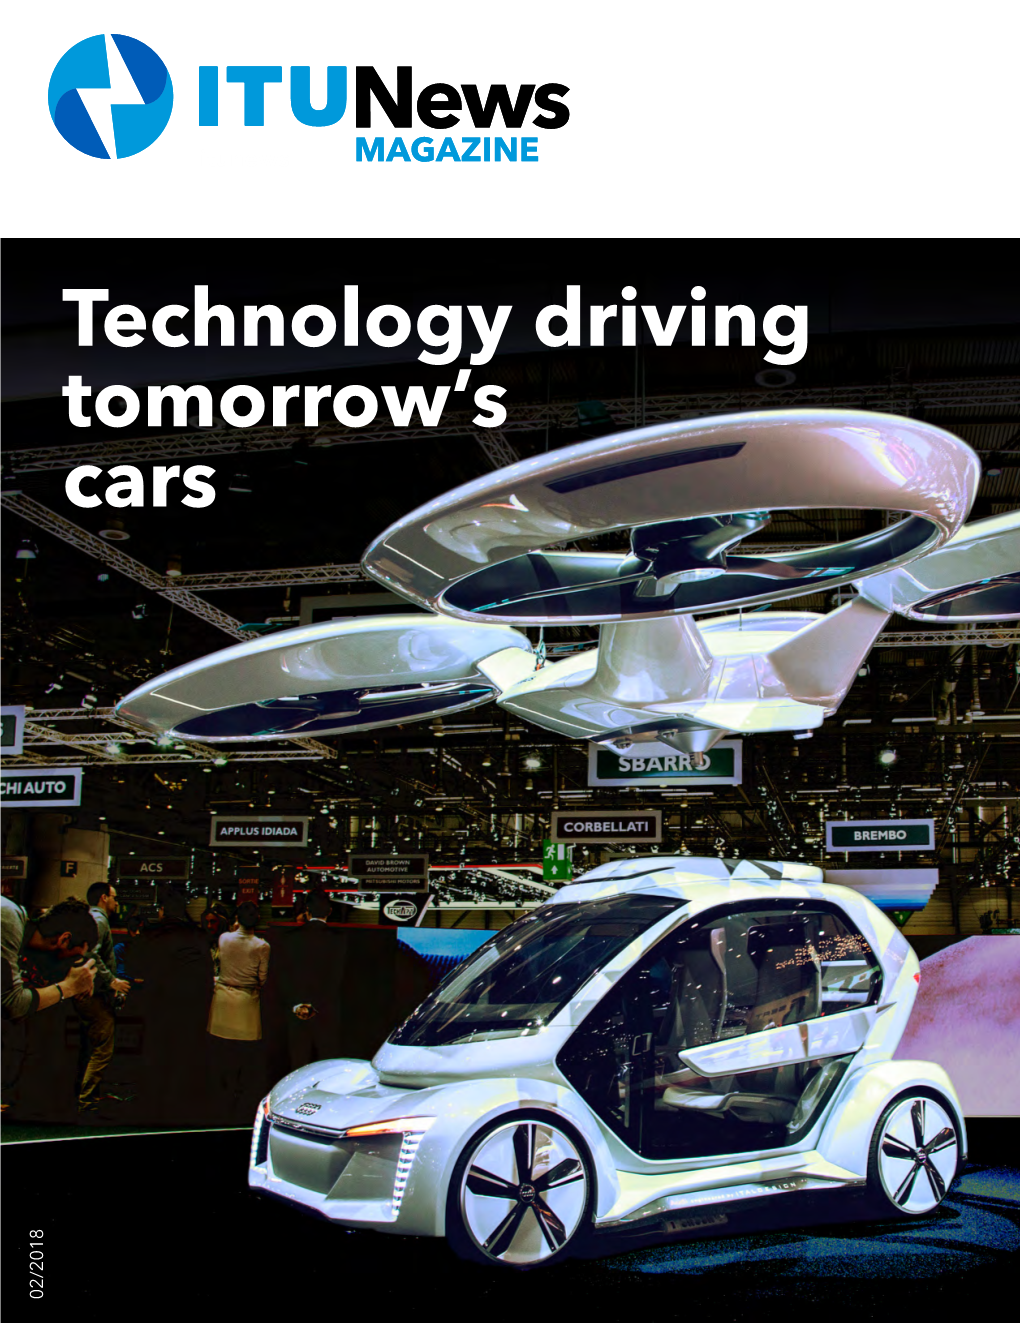 Technology Driving Tomorrow's Cars